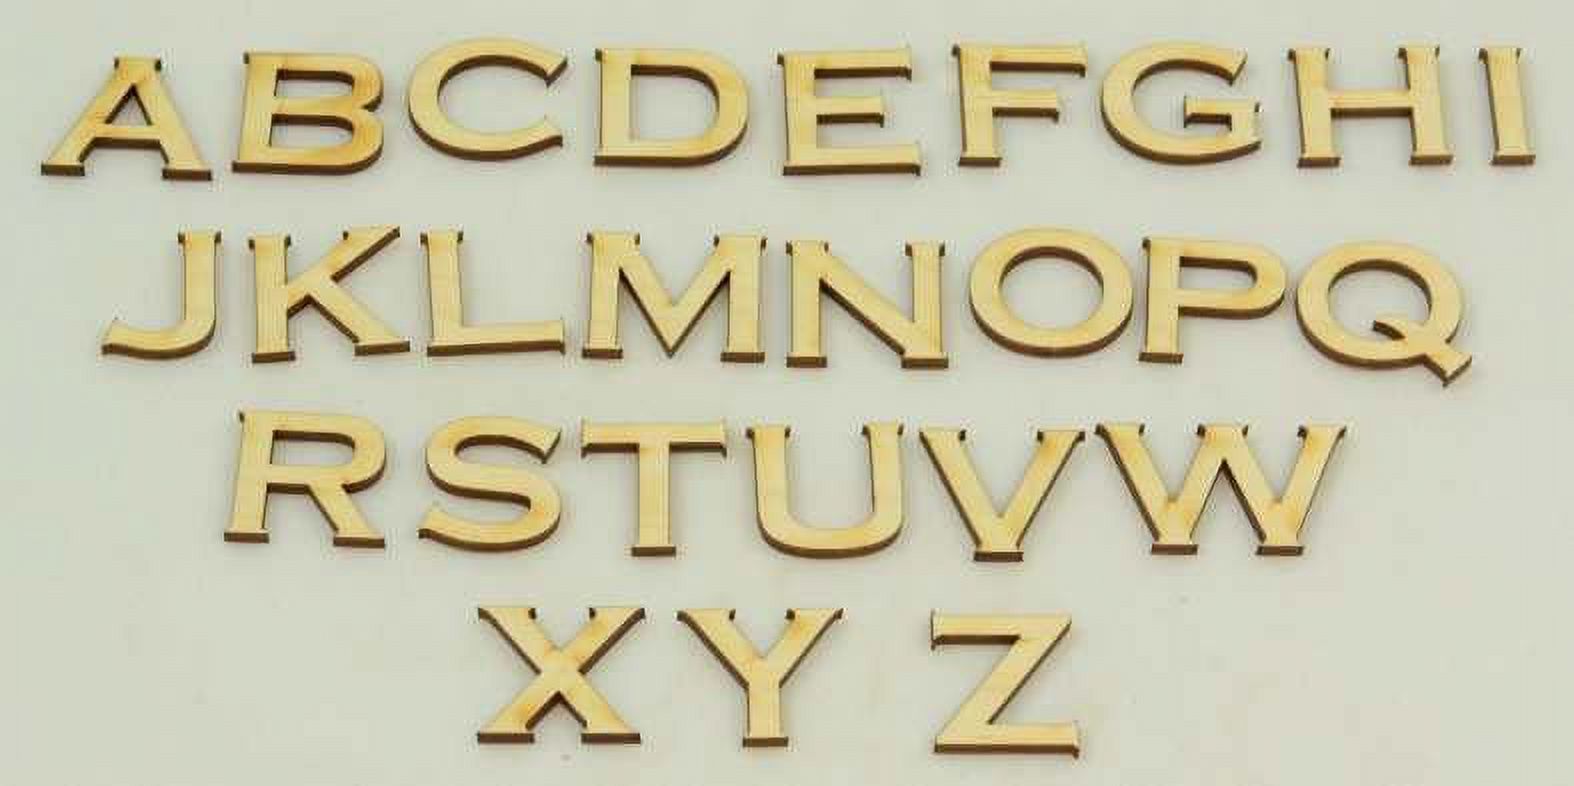 1 Pc, 12 Inch X 1/8 Inch Thick Wood Letters Z In The Copperplate Gothic Bold Font Great For Craft Project & Different Decor - image 2 of 3